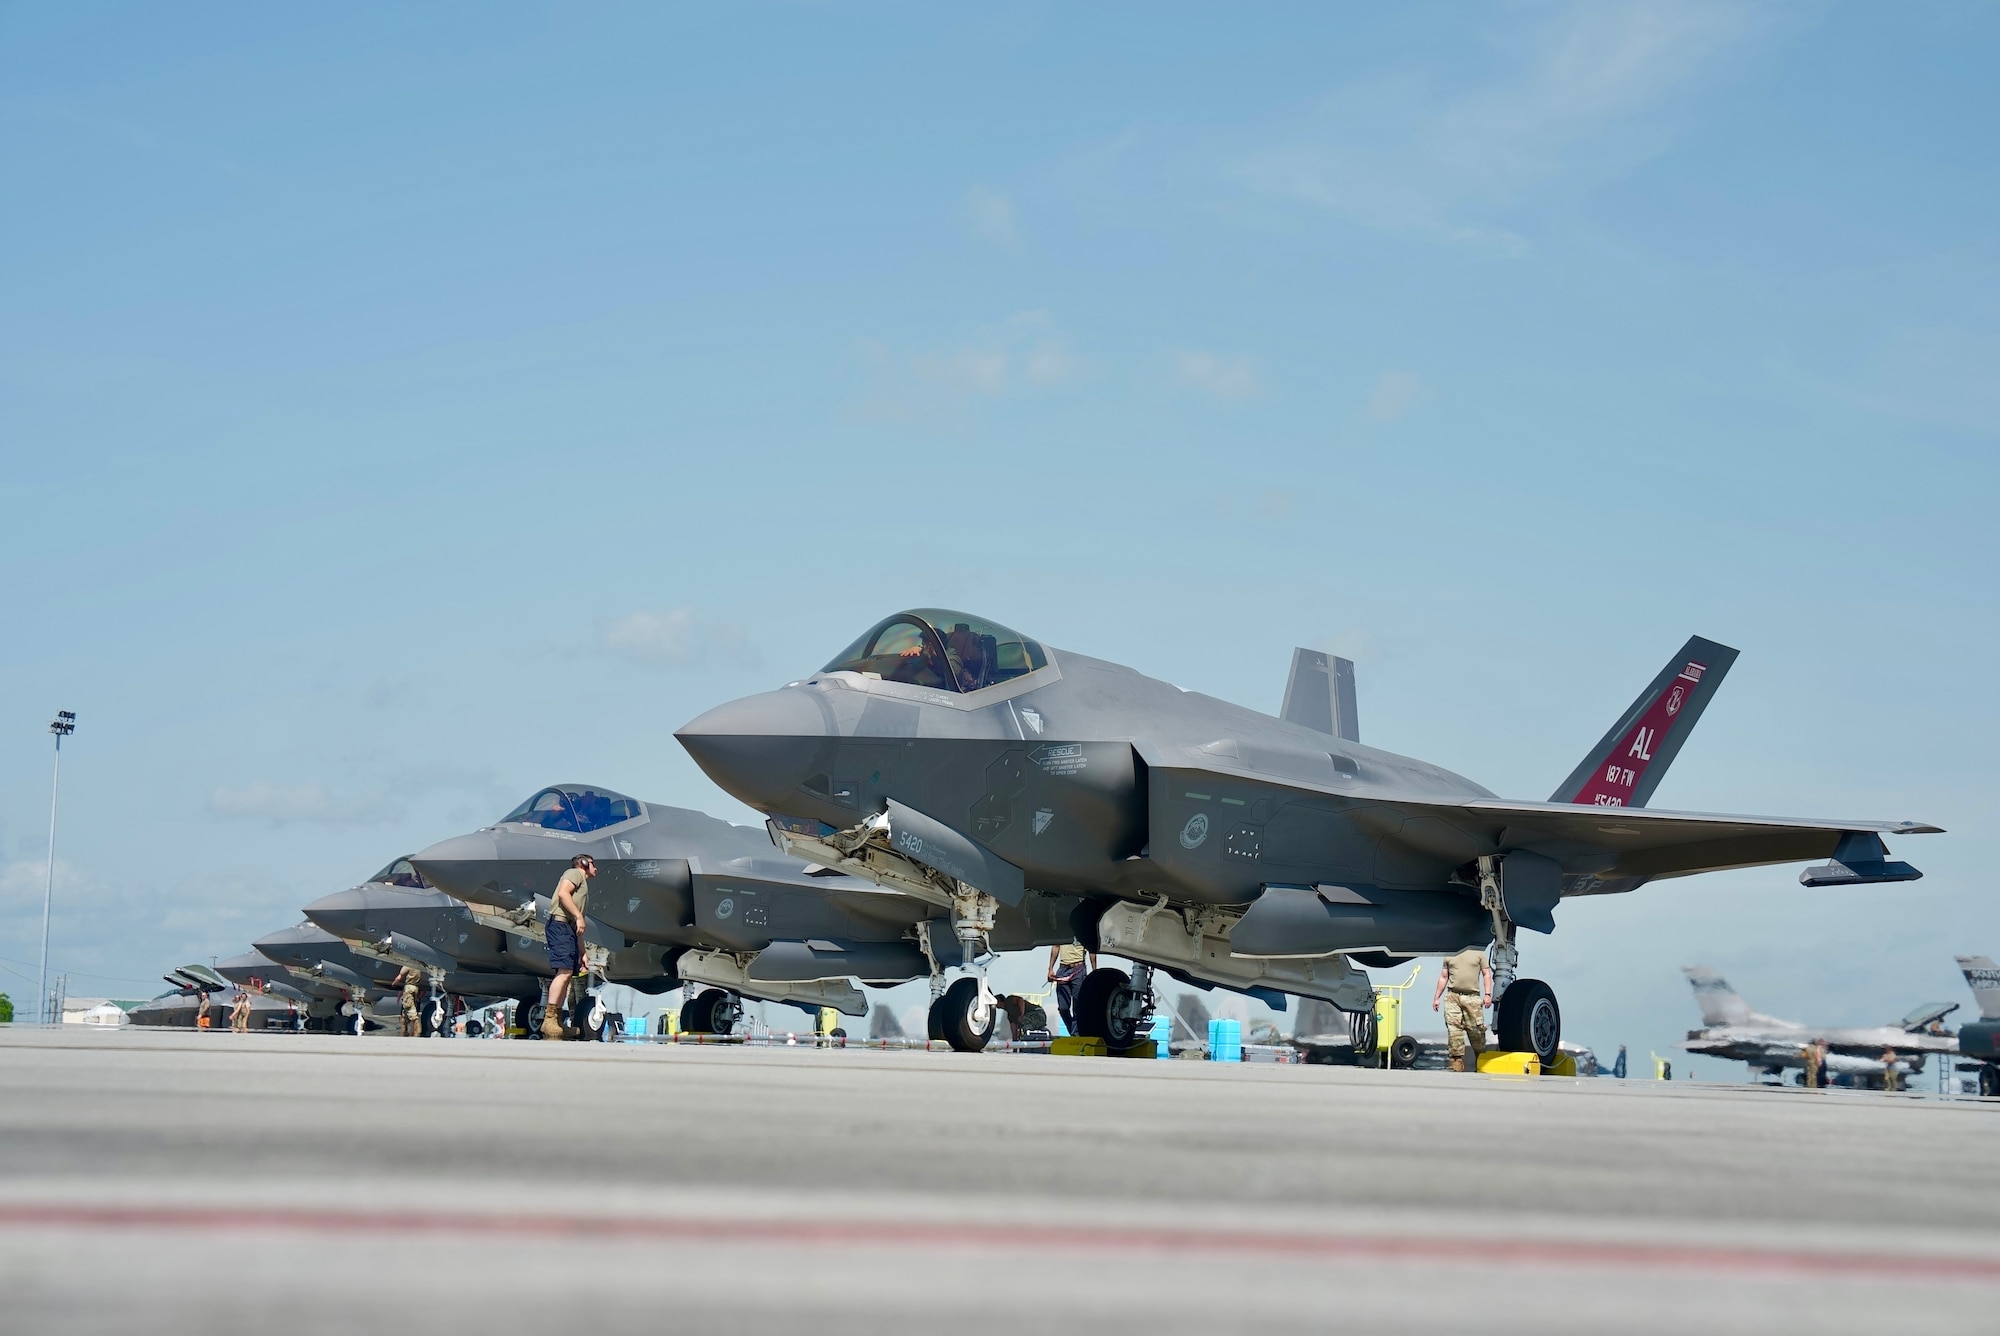 The 187th Fighter Wing participated in their first exercise with the newly acquired fifth-generation fighter aircraft.